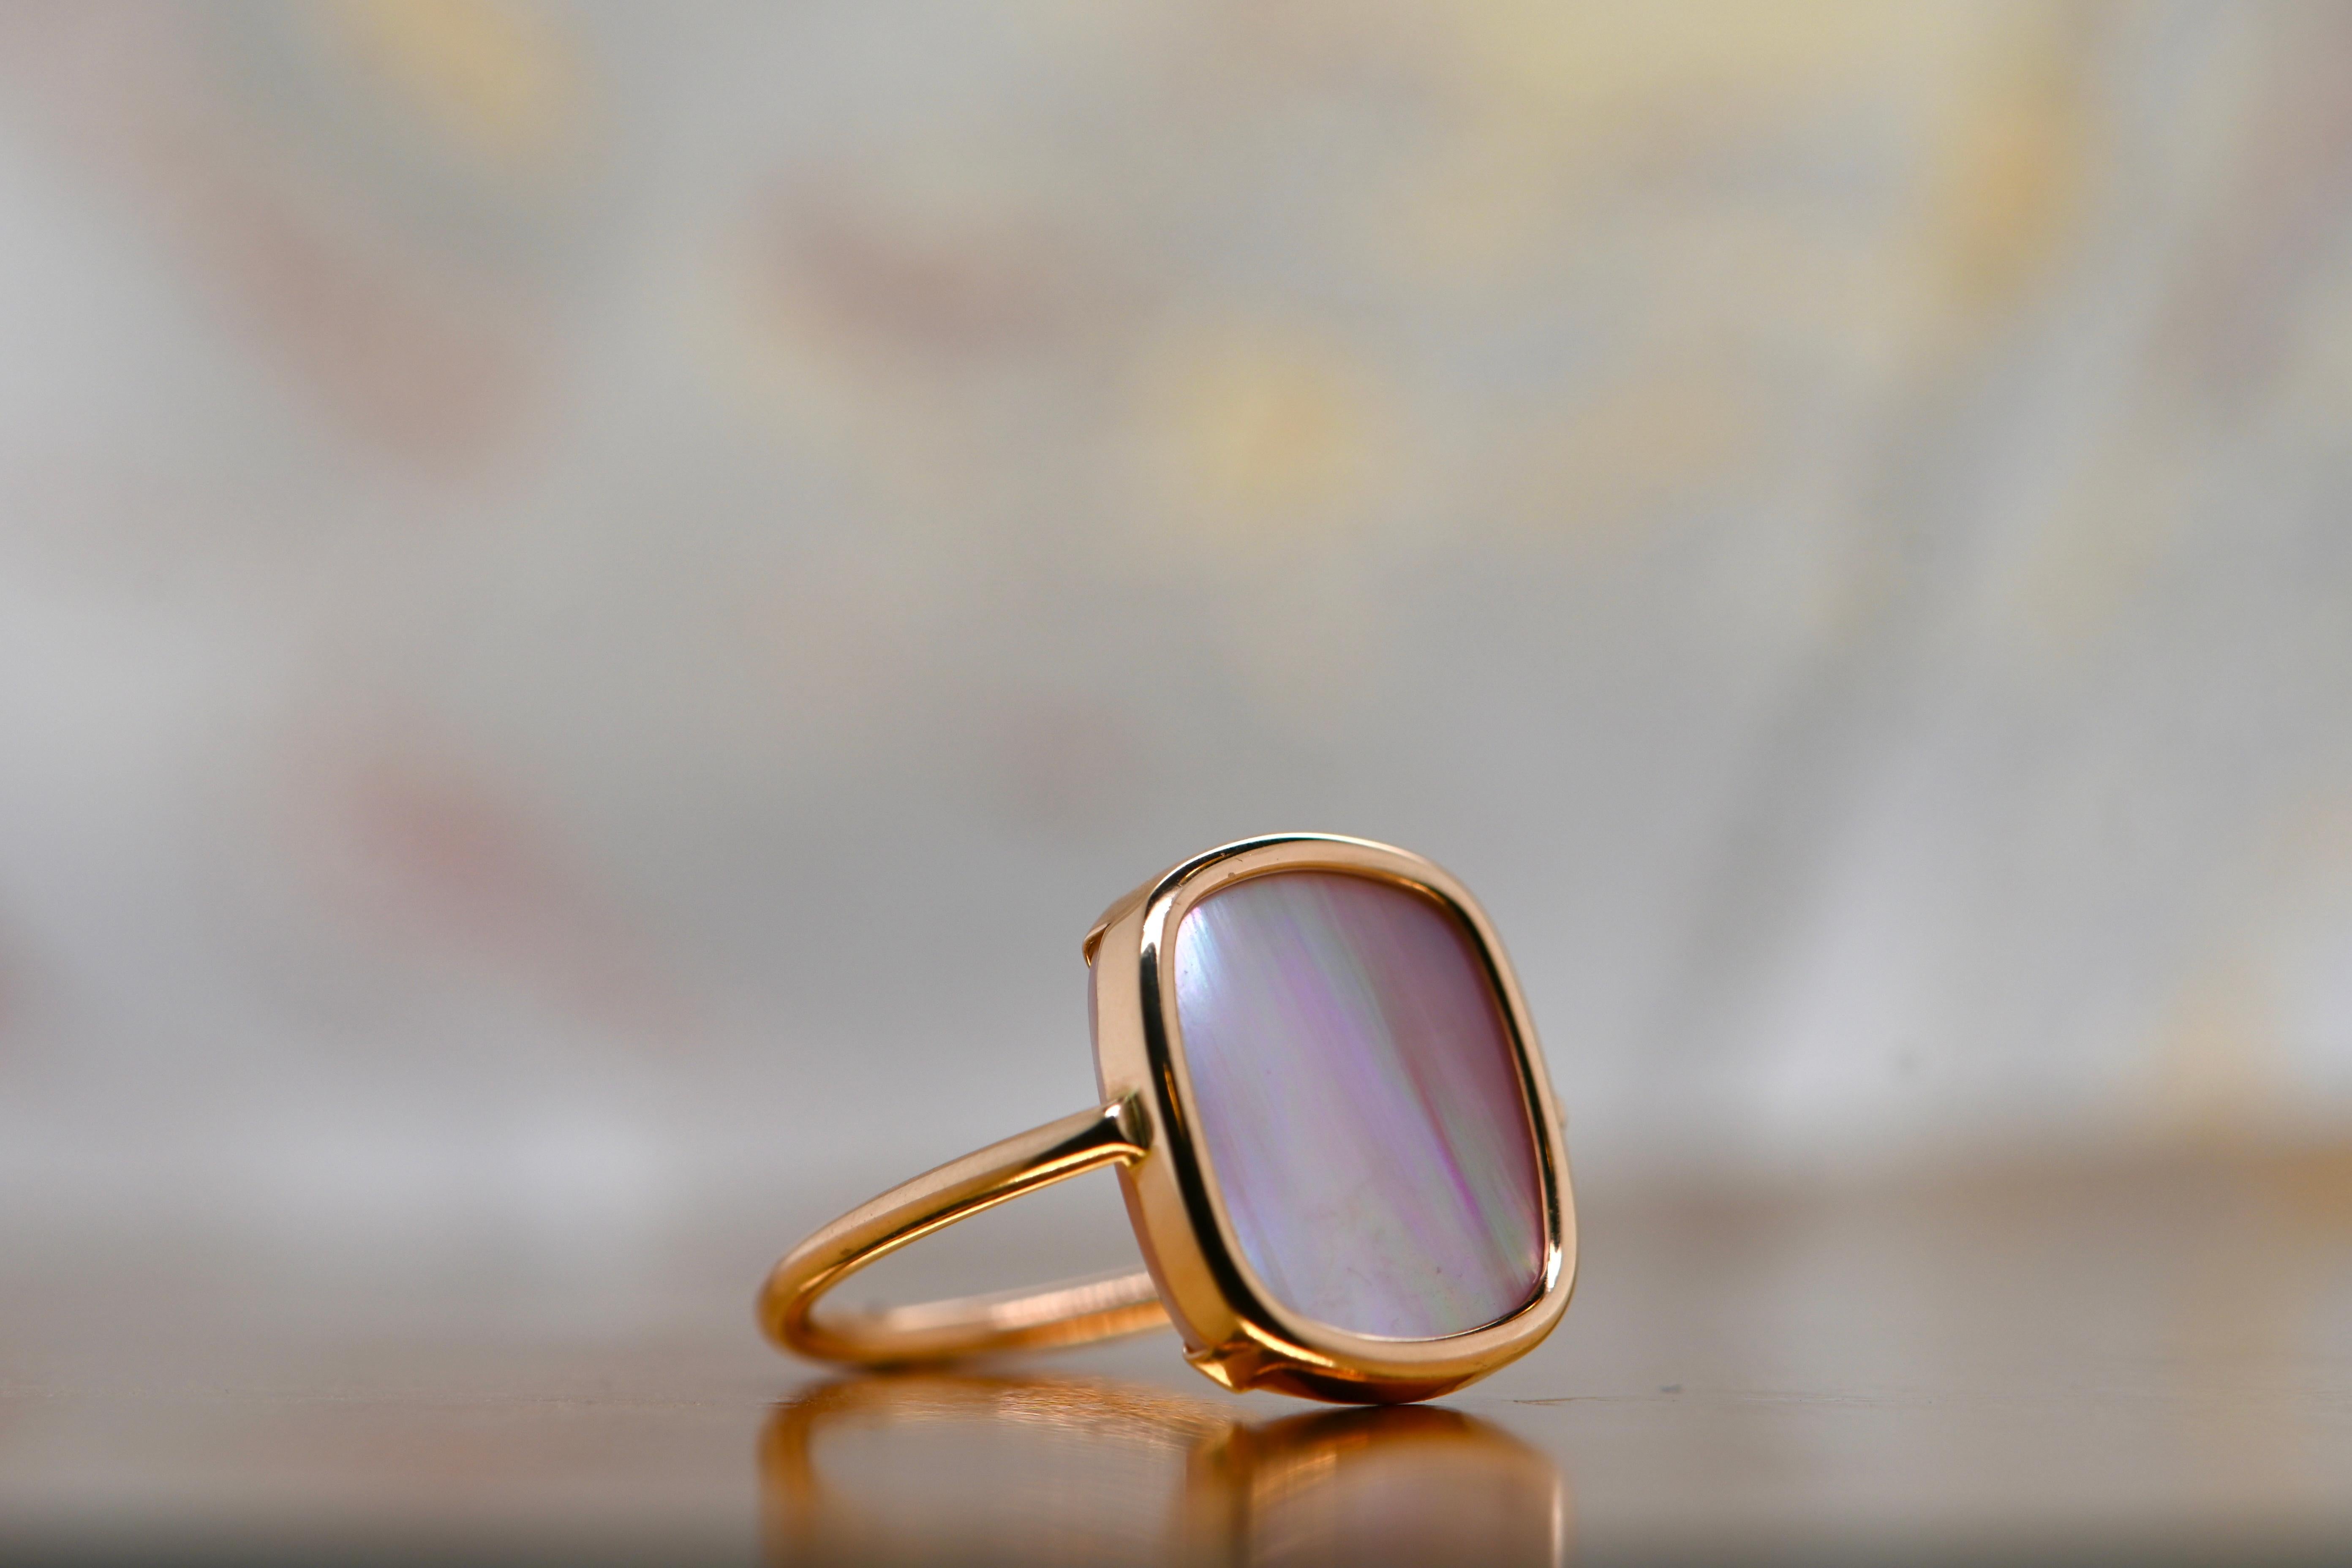 Discover the exquisite beauty of a true work of art worn on your finger with this sumptuous ring in 18 carat pink gold. Its delicate and refined radiance is magnified by a setting set with delicate pink mother-of-pearl stones, giving this creation a